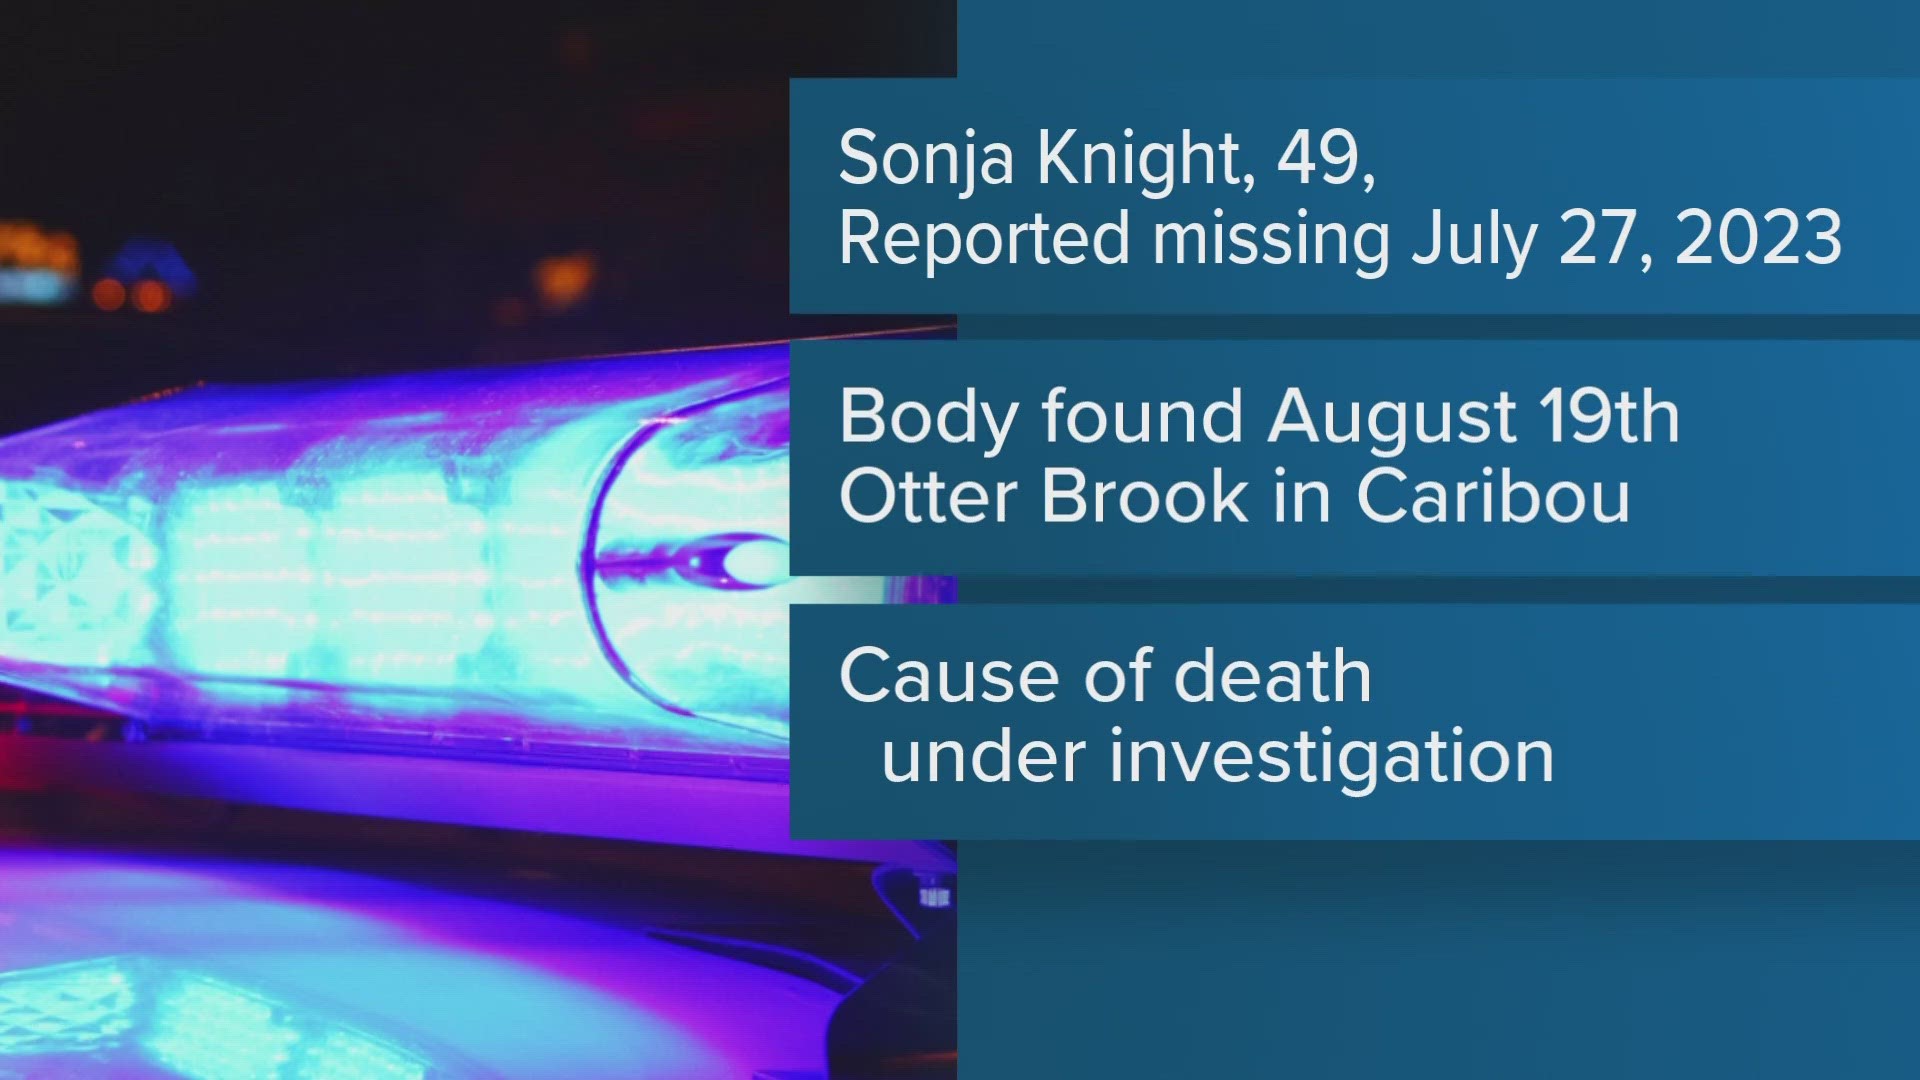 She was reported missing on July 27.